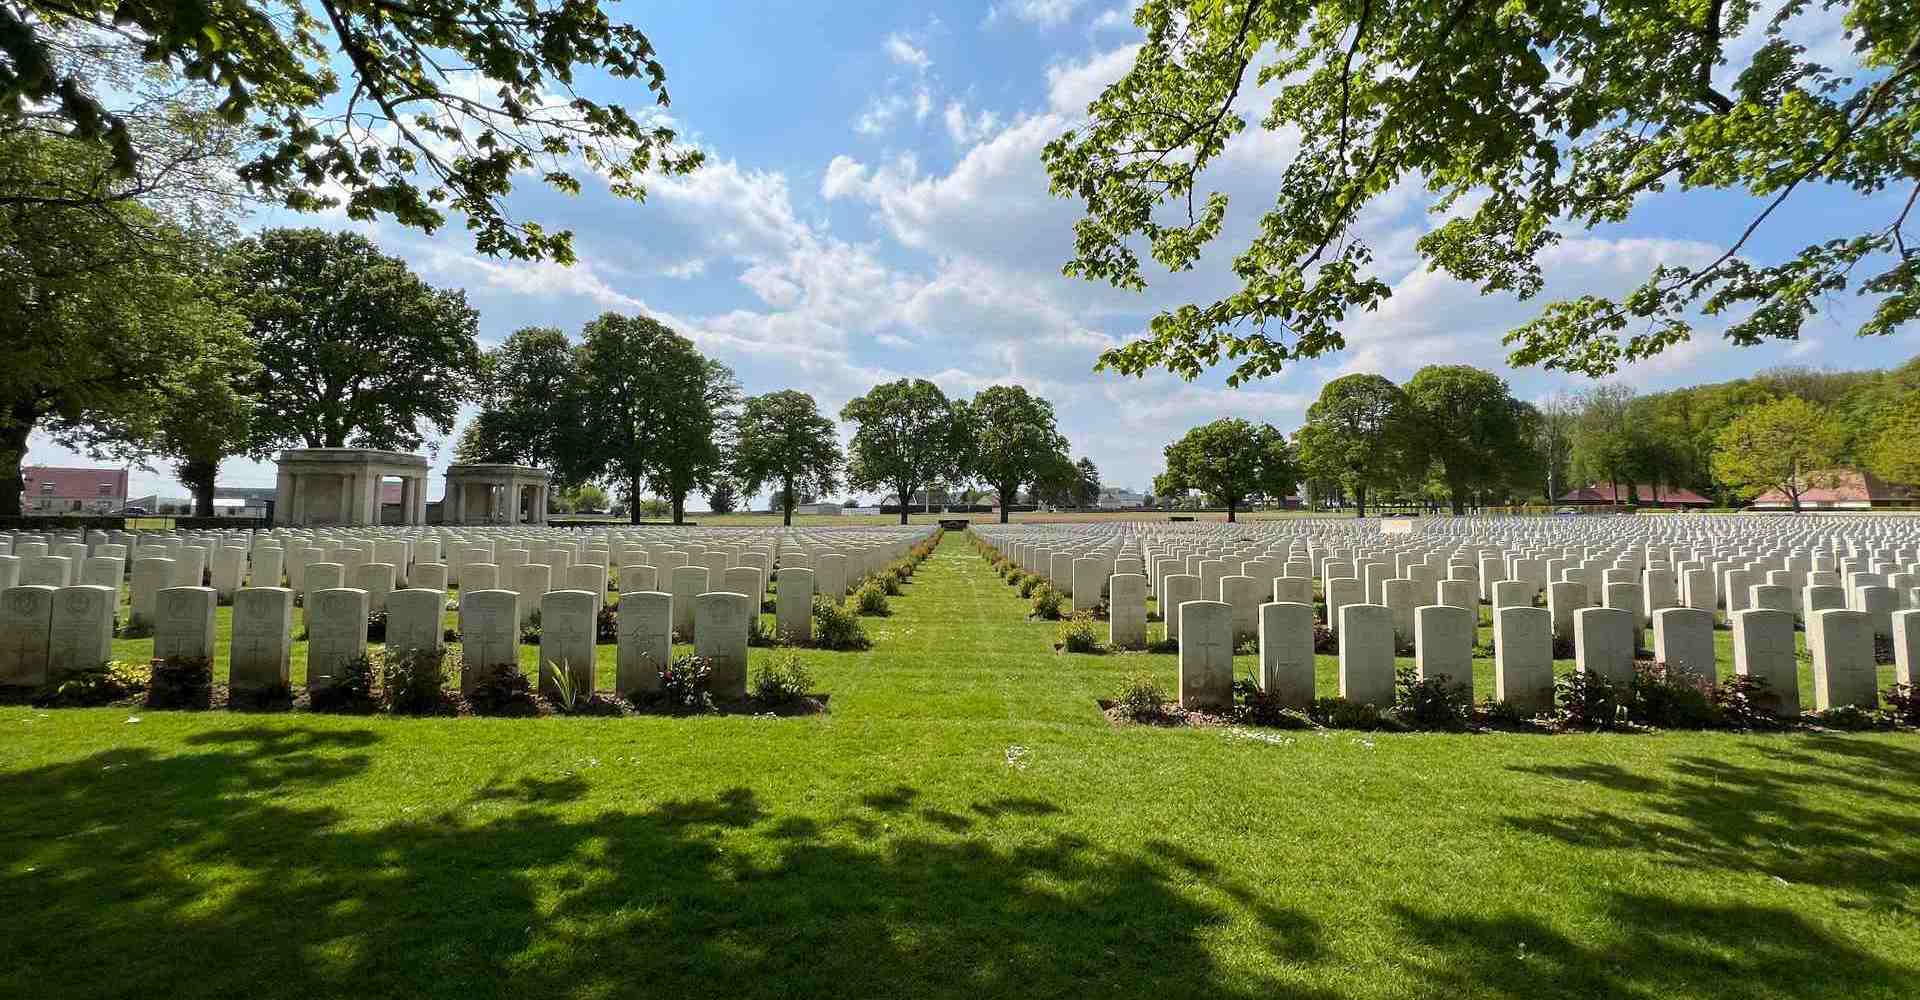 Tombstones in Delvillewood Cemetery, France. The Battle of the Somme